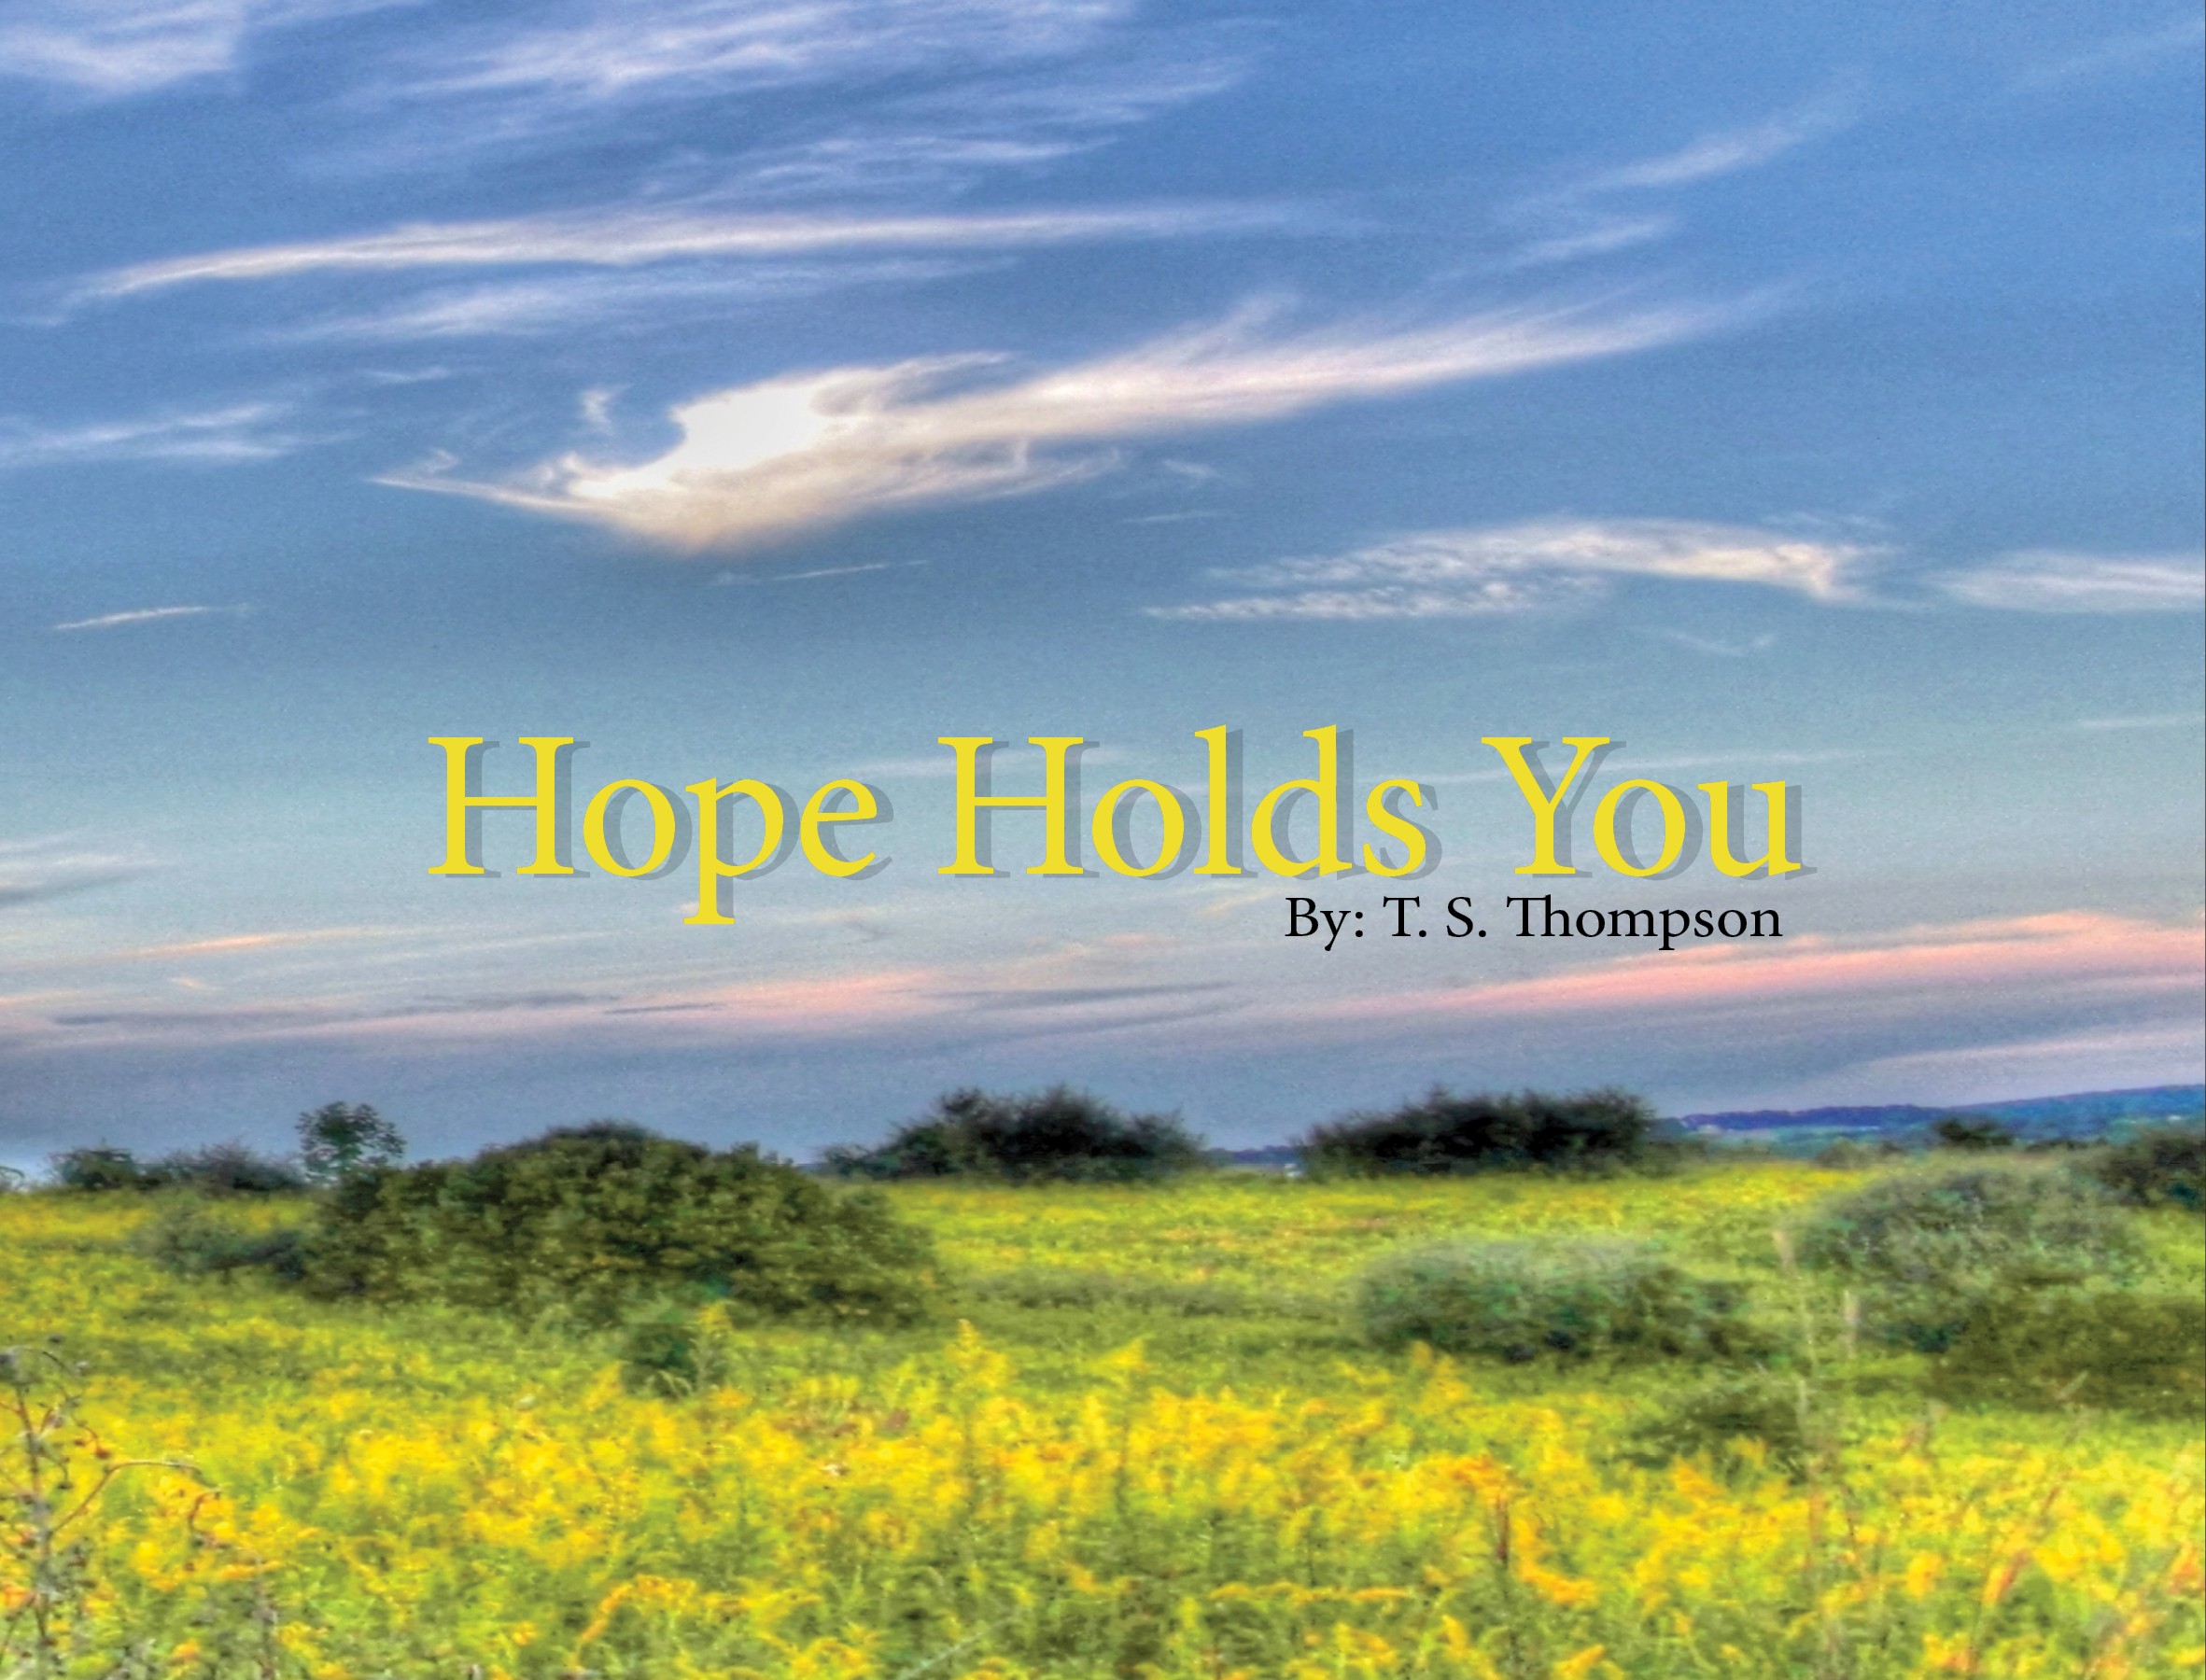 FREE: Hope Holds You by T. S. Thompson